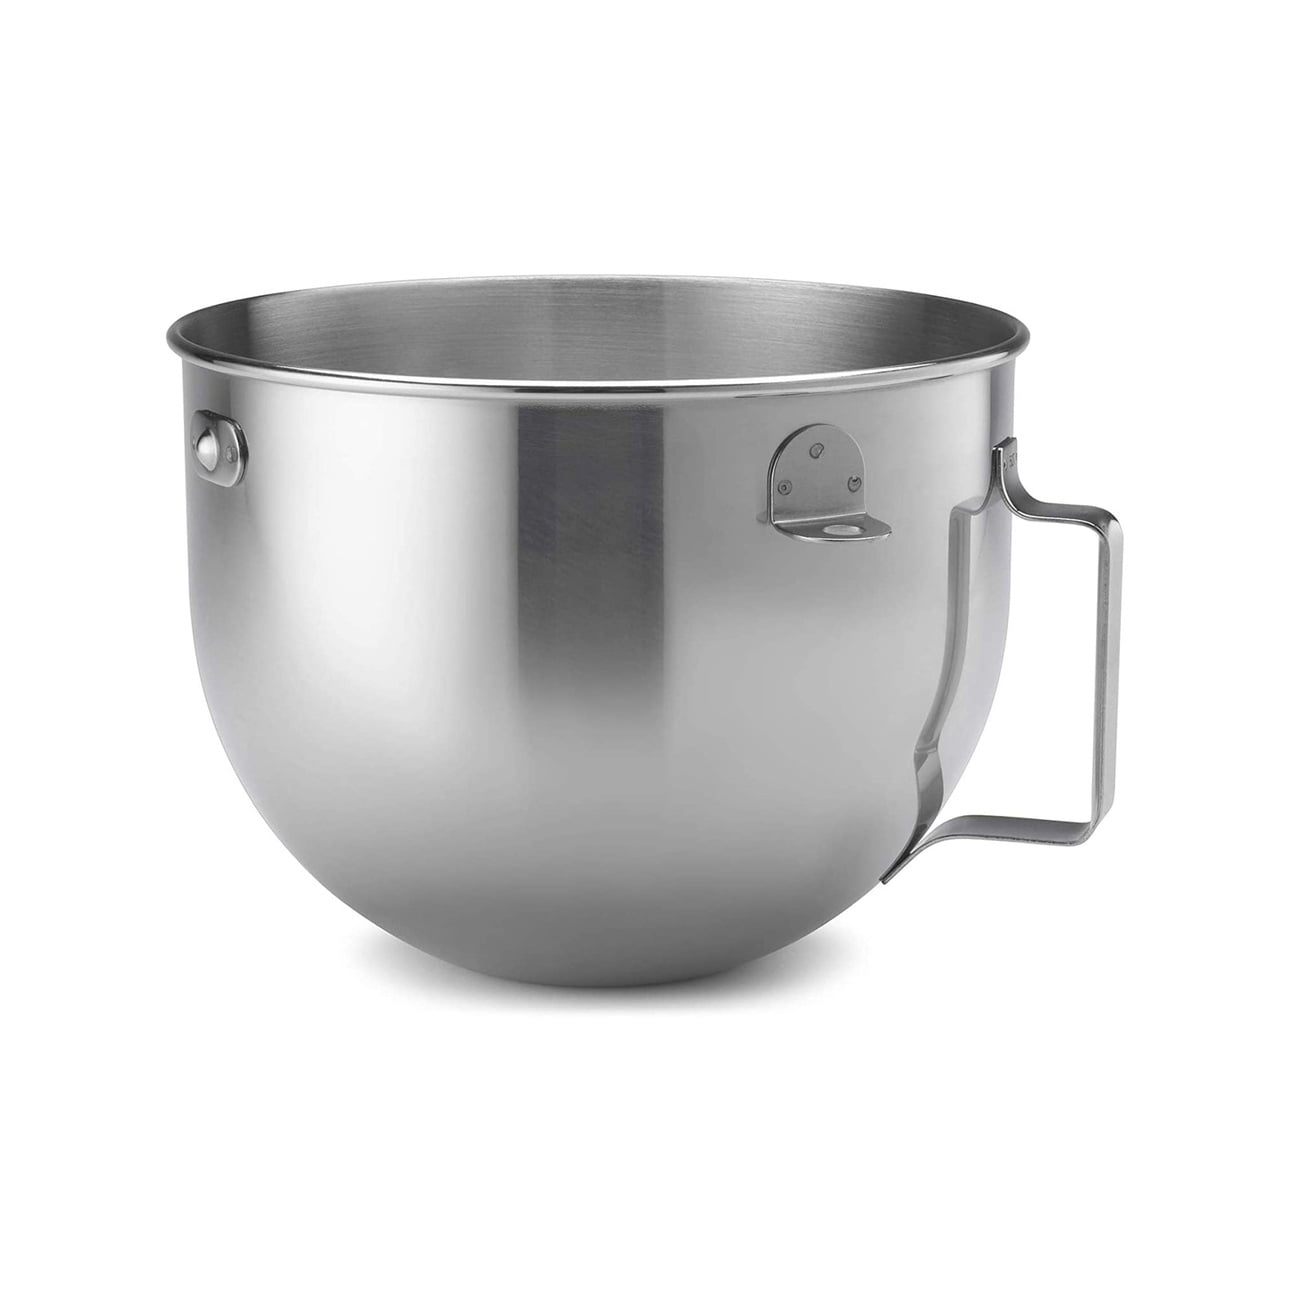 KitchenAid 5-qt Radiant Stainless Steel Mixing Bowl 